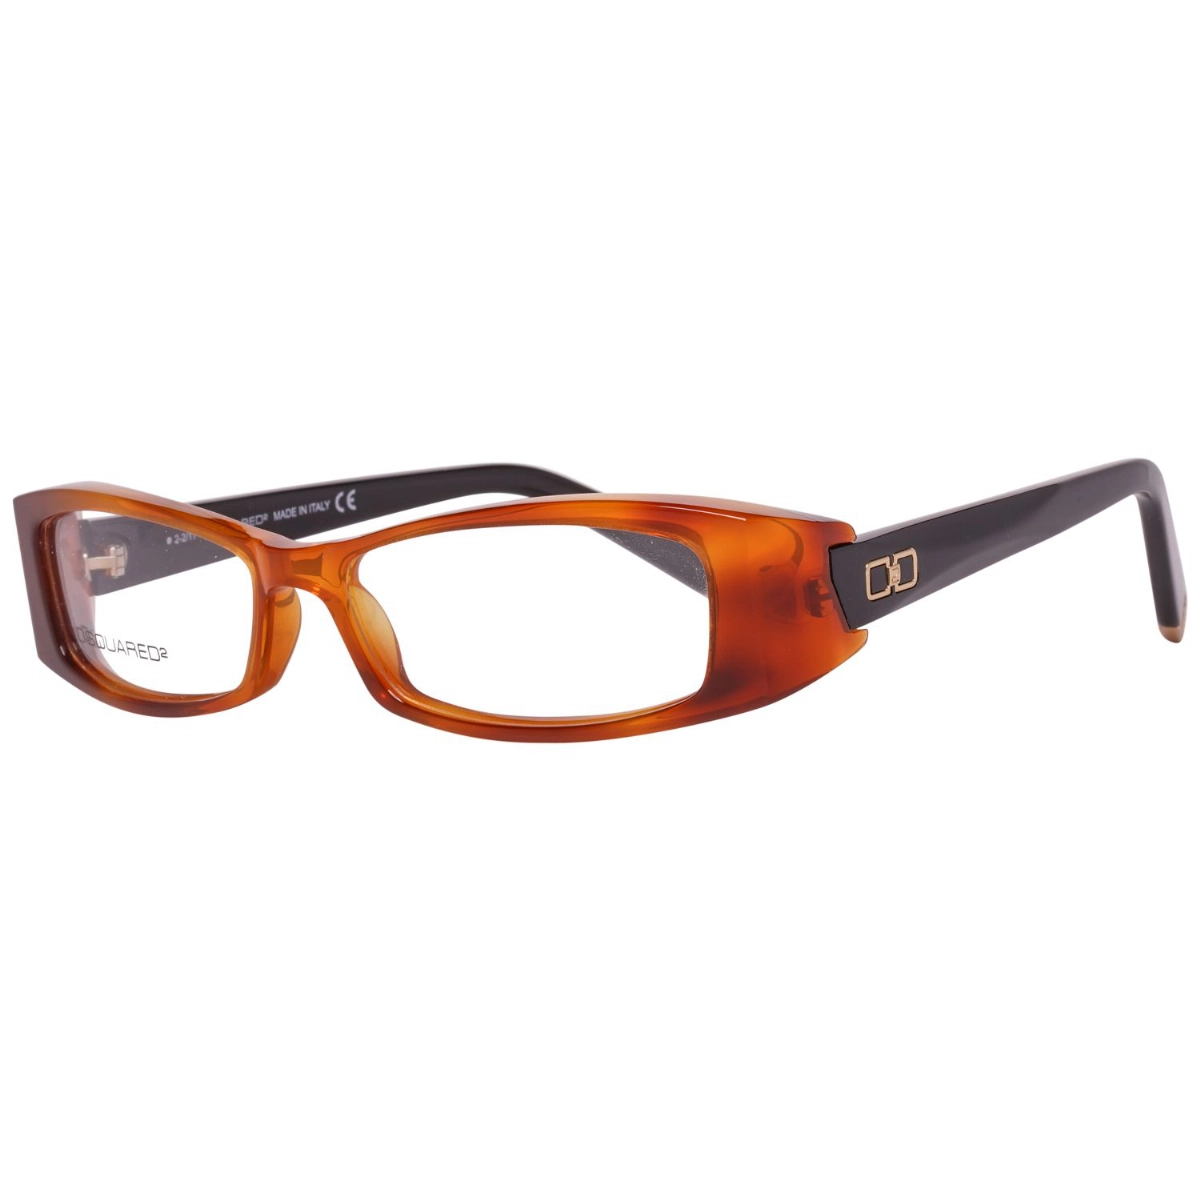 GLASSES FOR WOMAN DSQUARED2 DQ5020-053-51